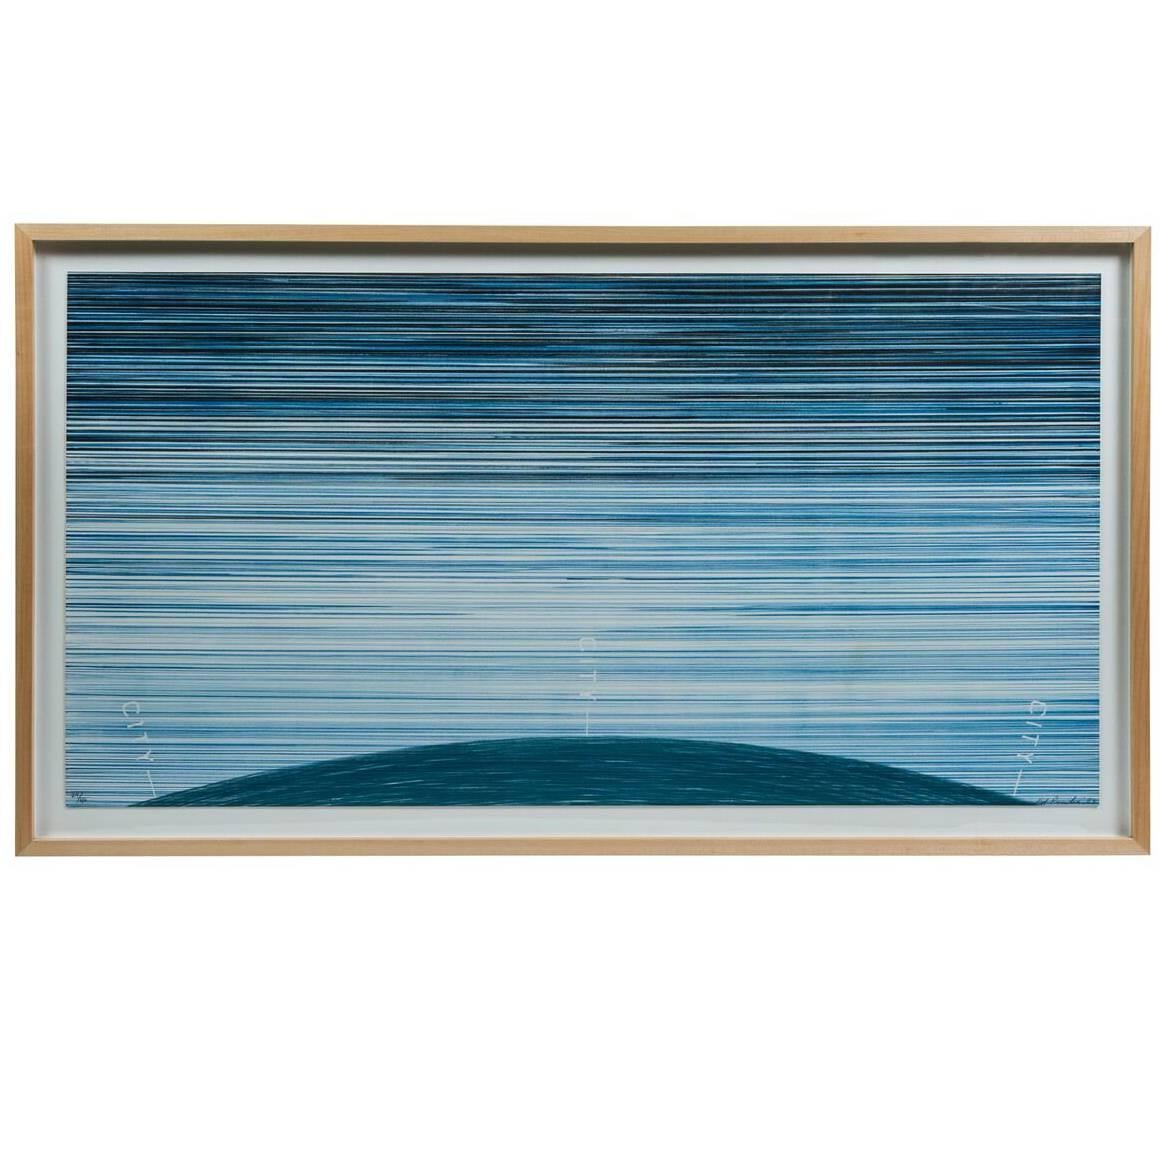 Signed and Numbered, 1982, Ed Ruscha Lithograph